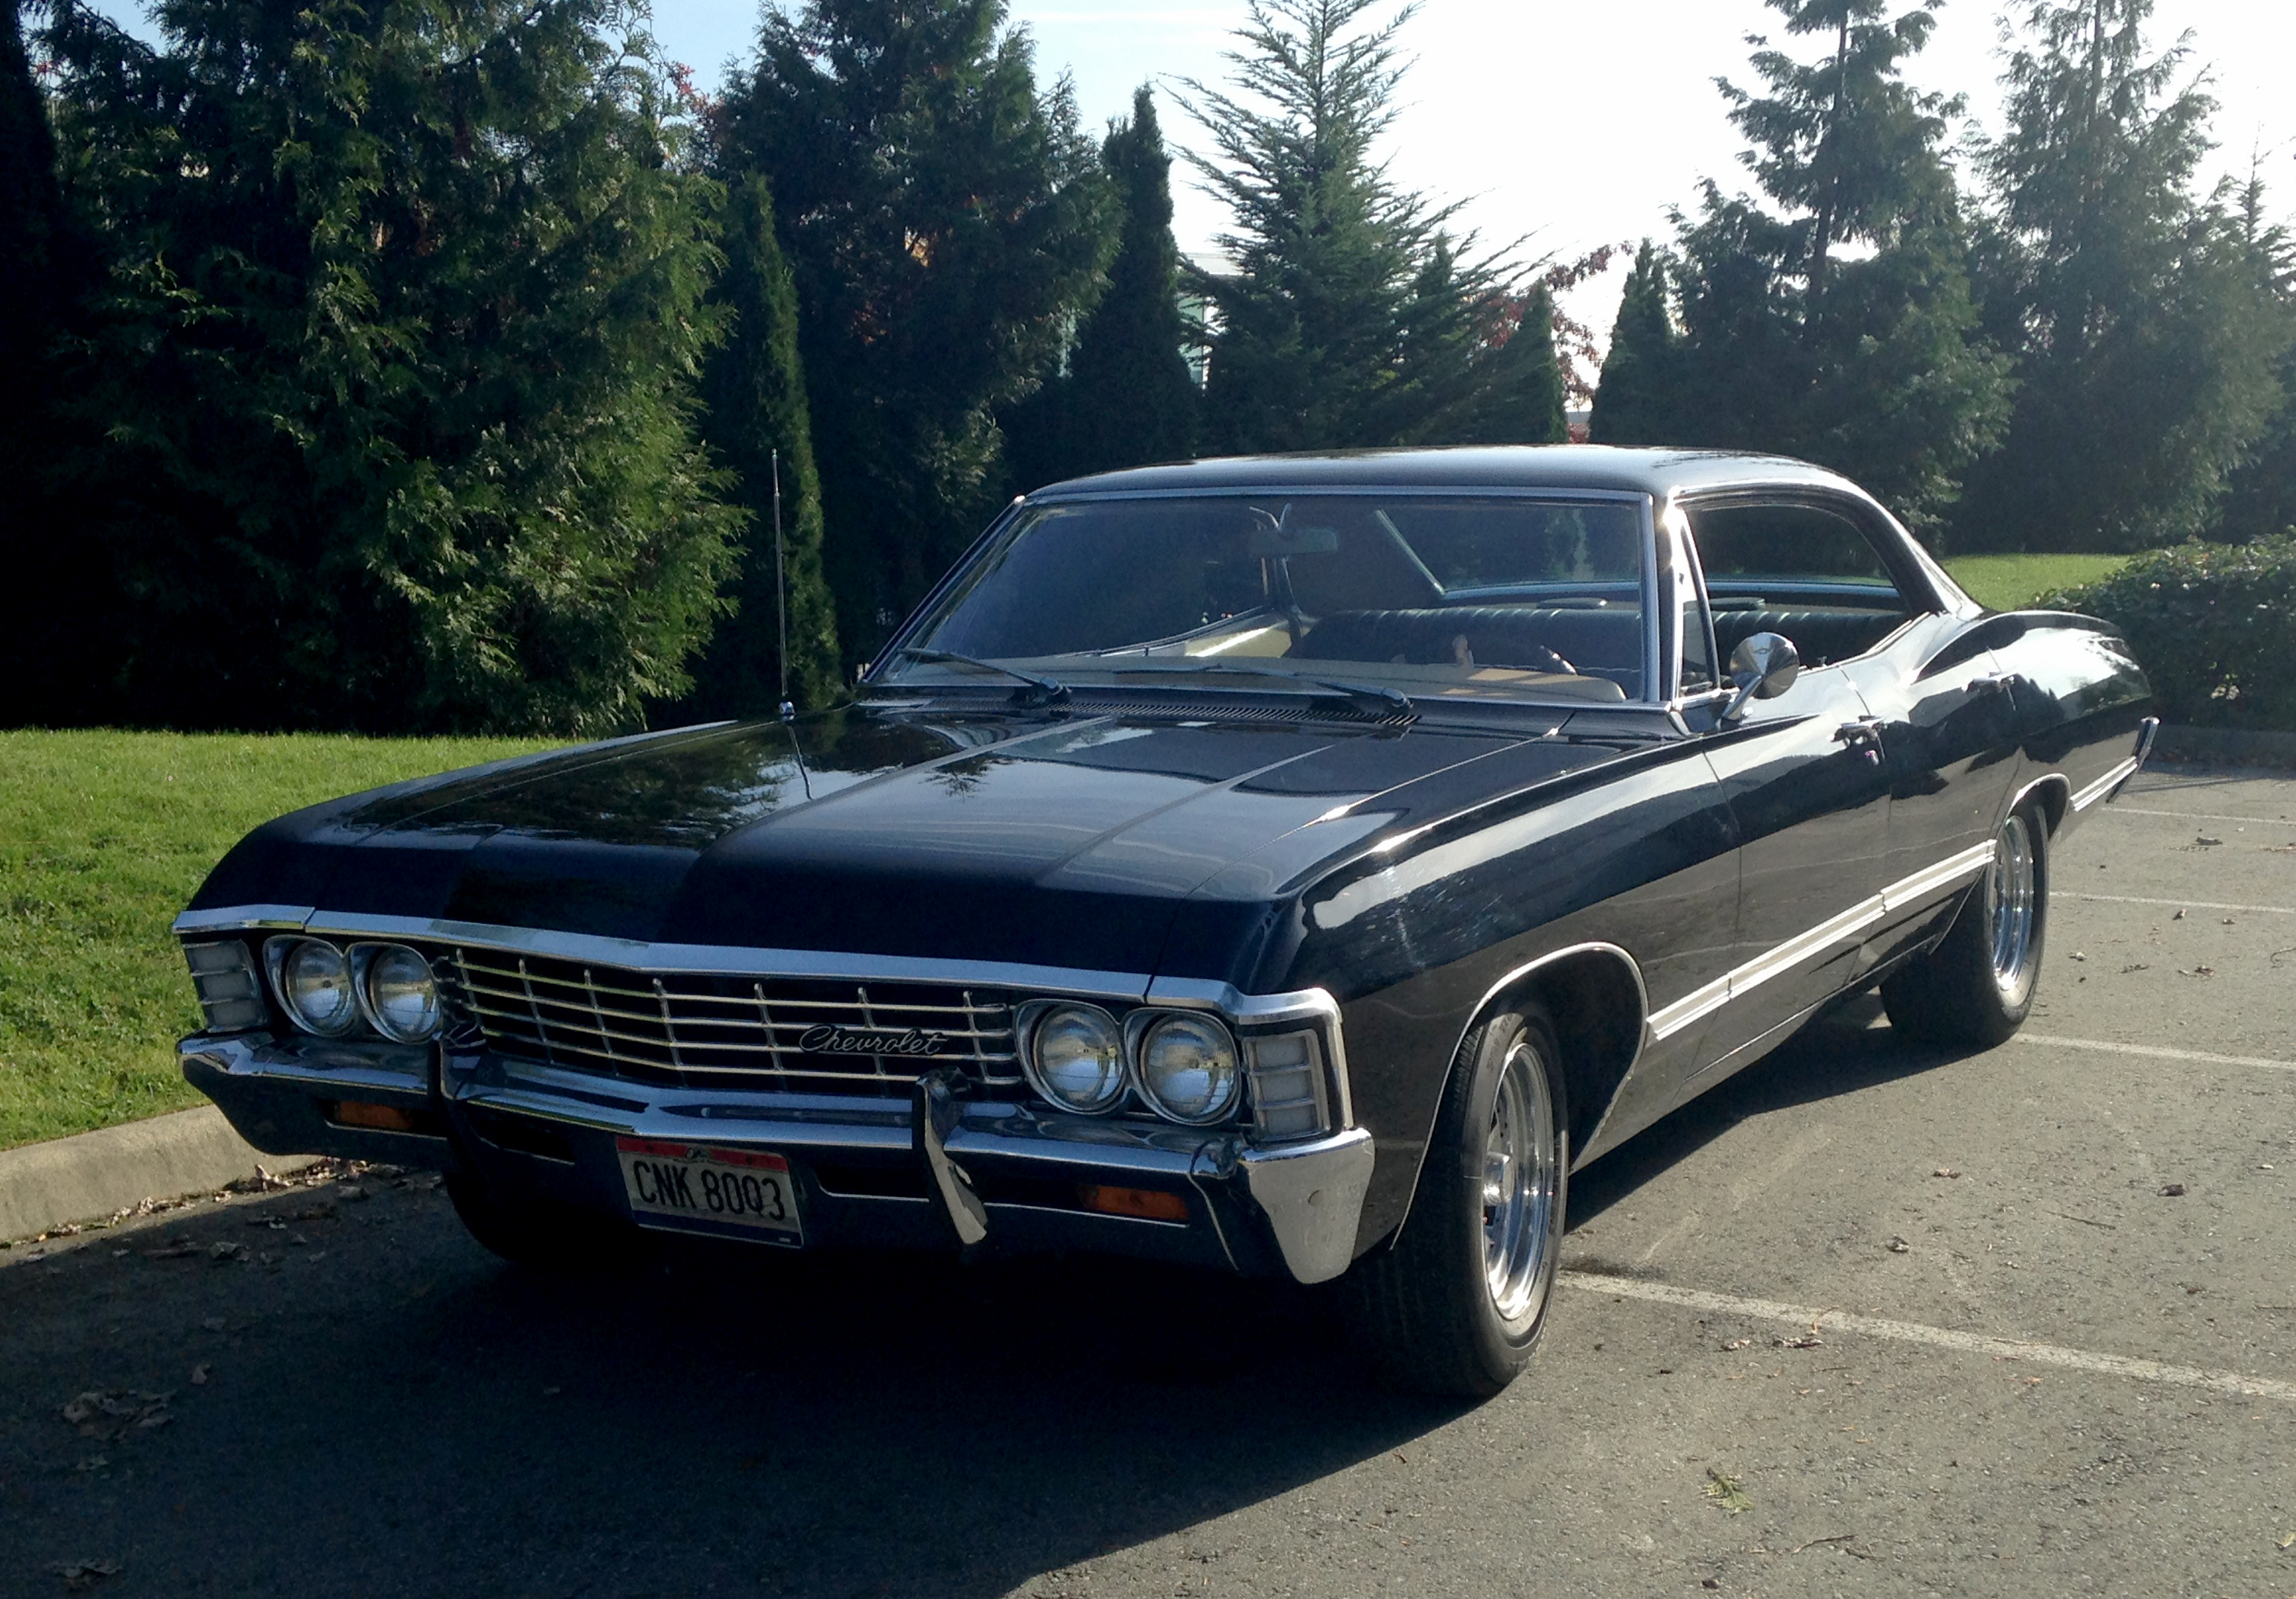 Baby the Chevrolet Impala from Supernatural